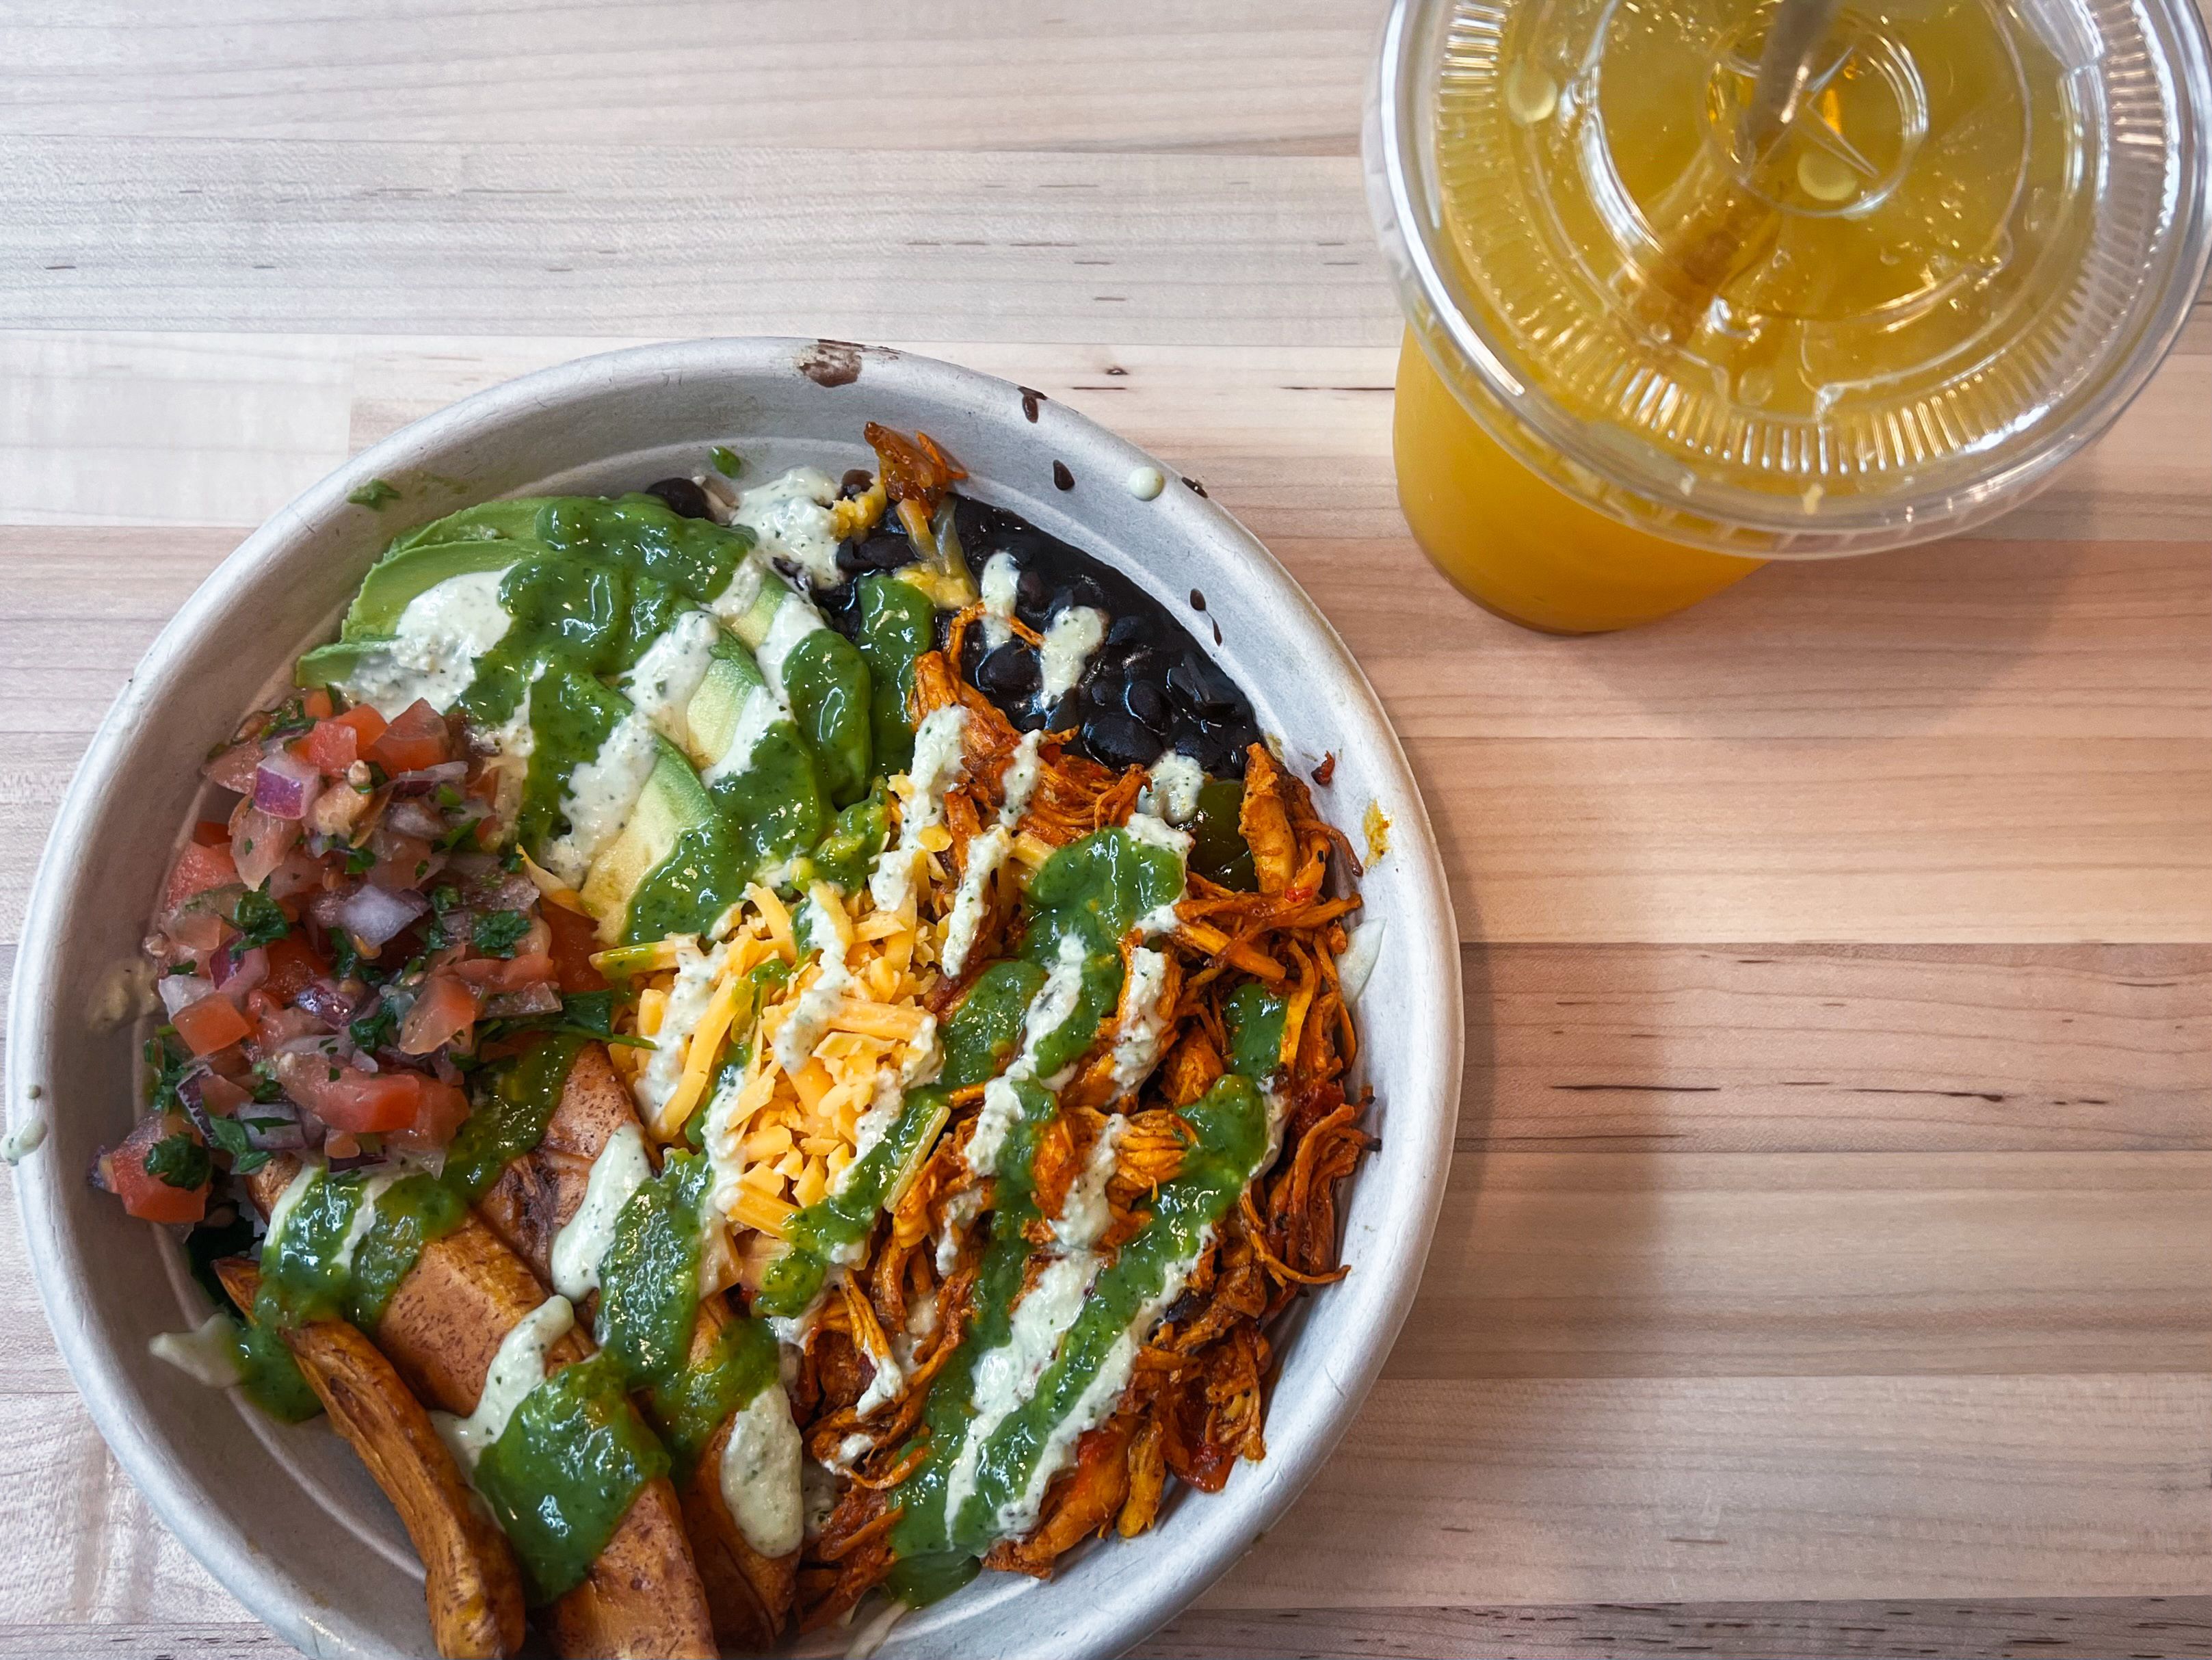 An arepa bowl with chicken and a drink.